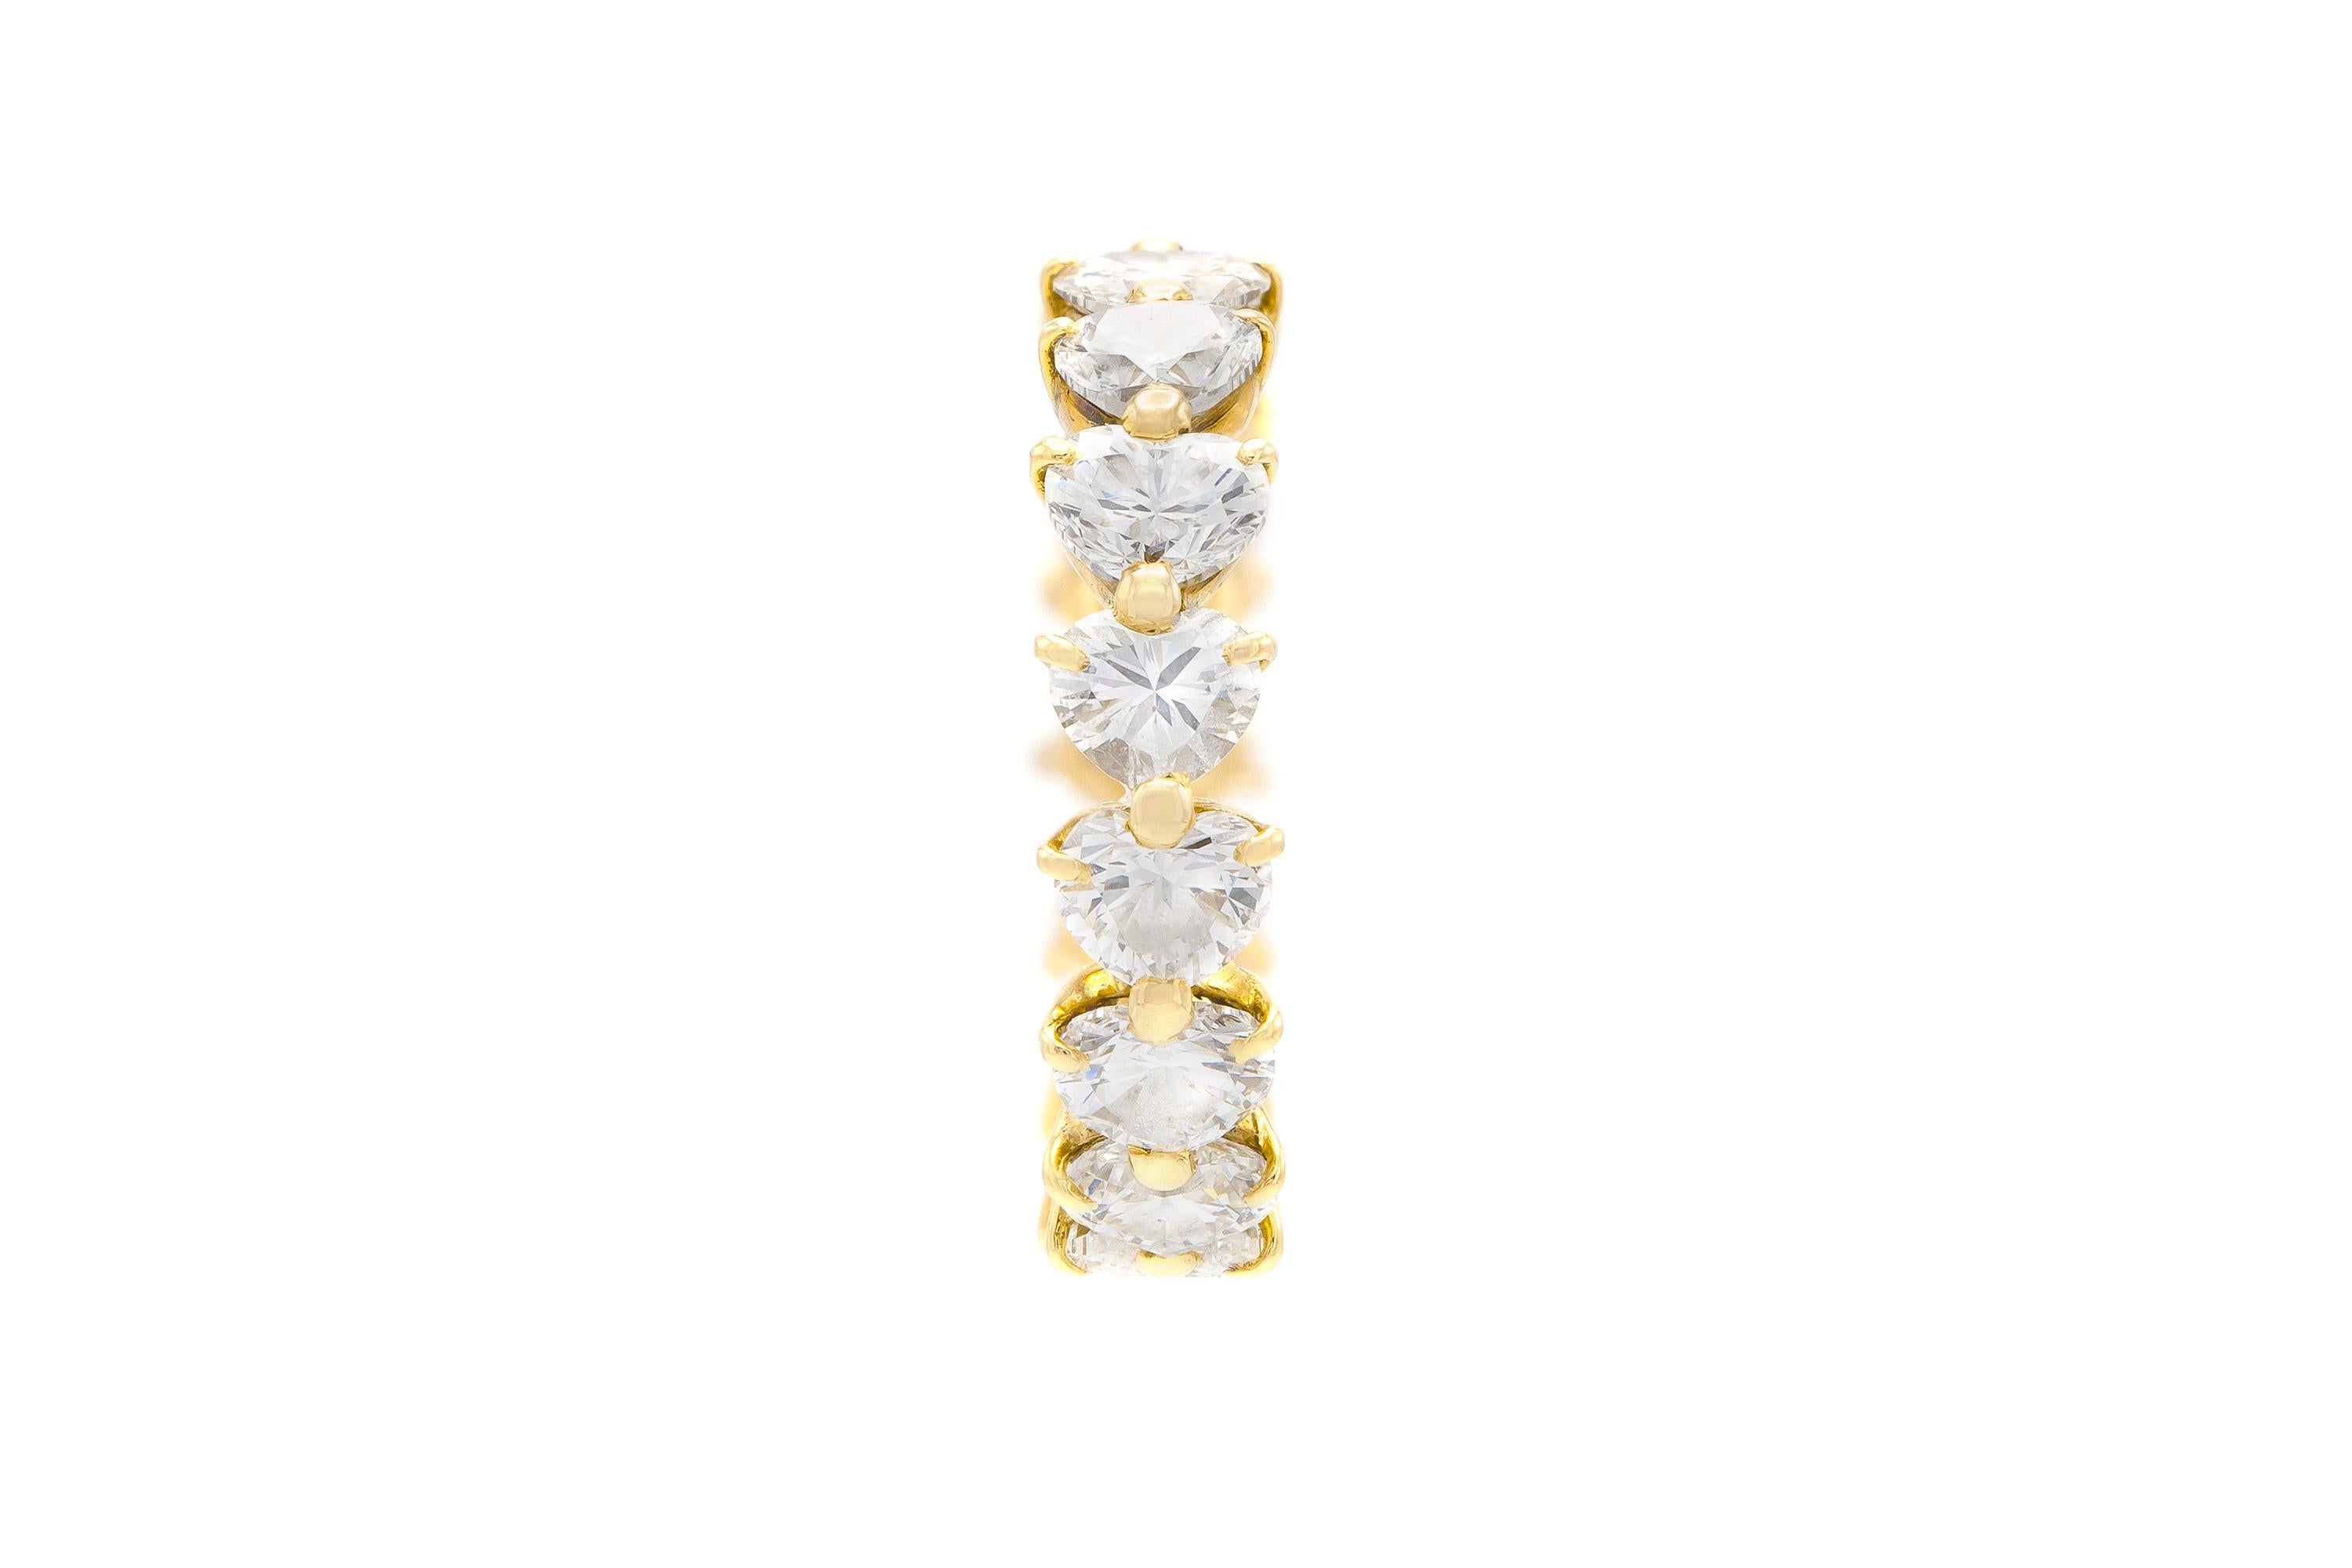 Finely crafted in 18k yellow gold with 15 heart cut diamonds weighing a total of approximately 5.50 carats.
Signed by Boucheron
Circa 1980s